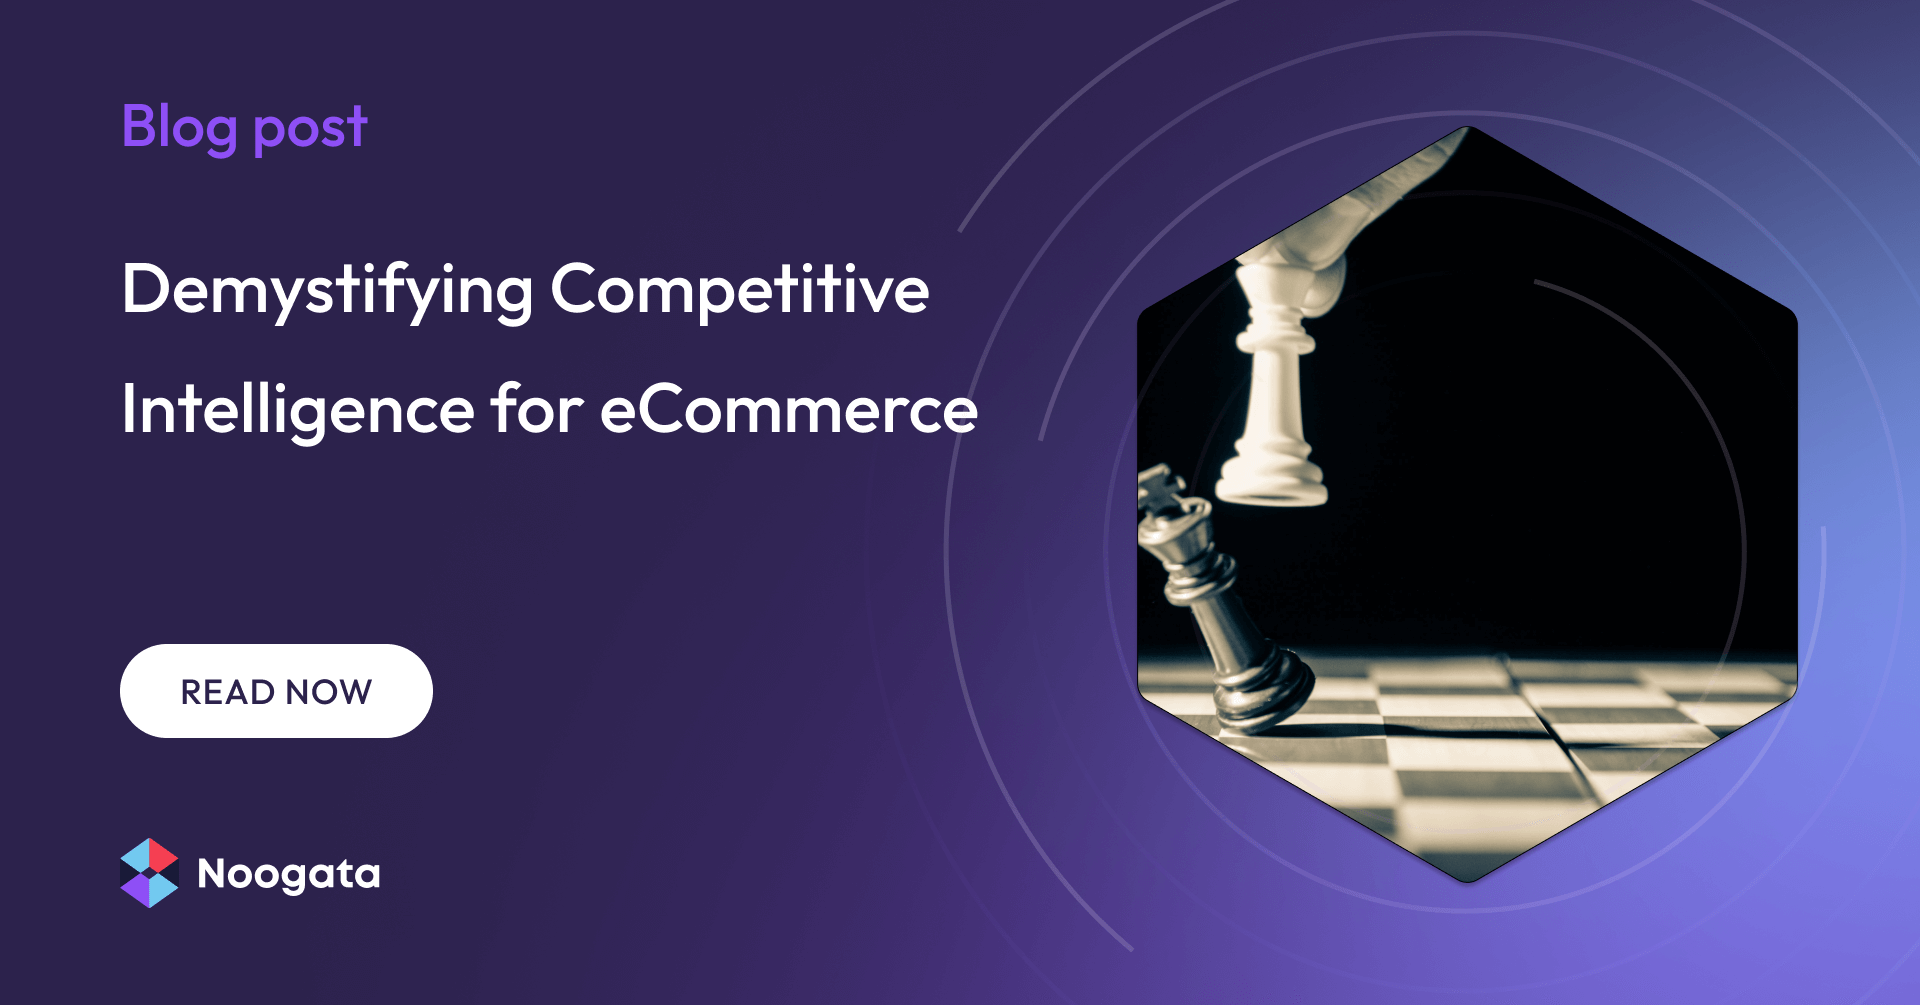 Demystifying Competitive Intelligence for eCommerce